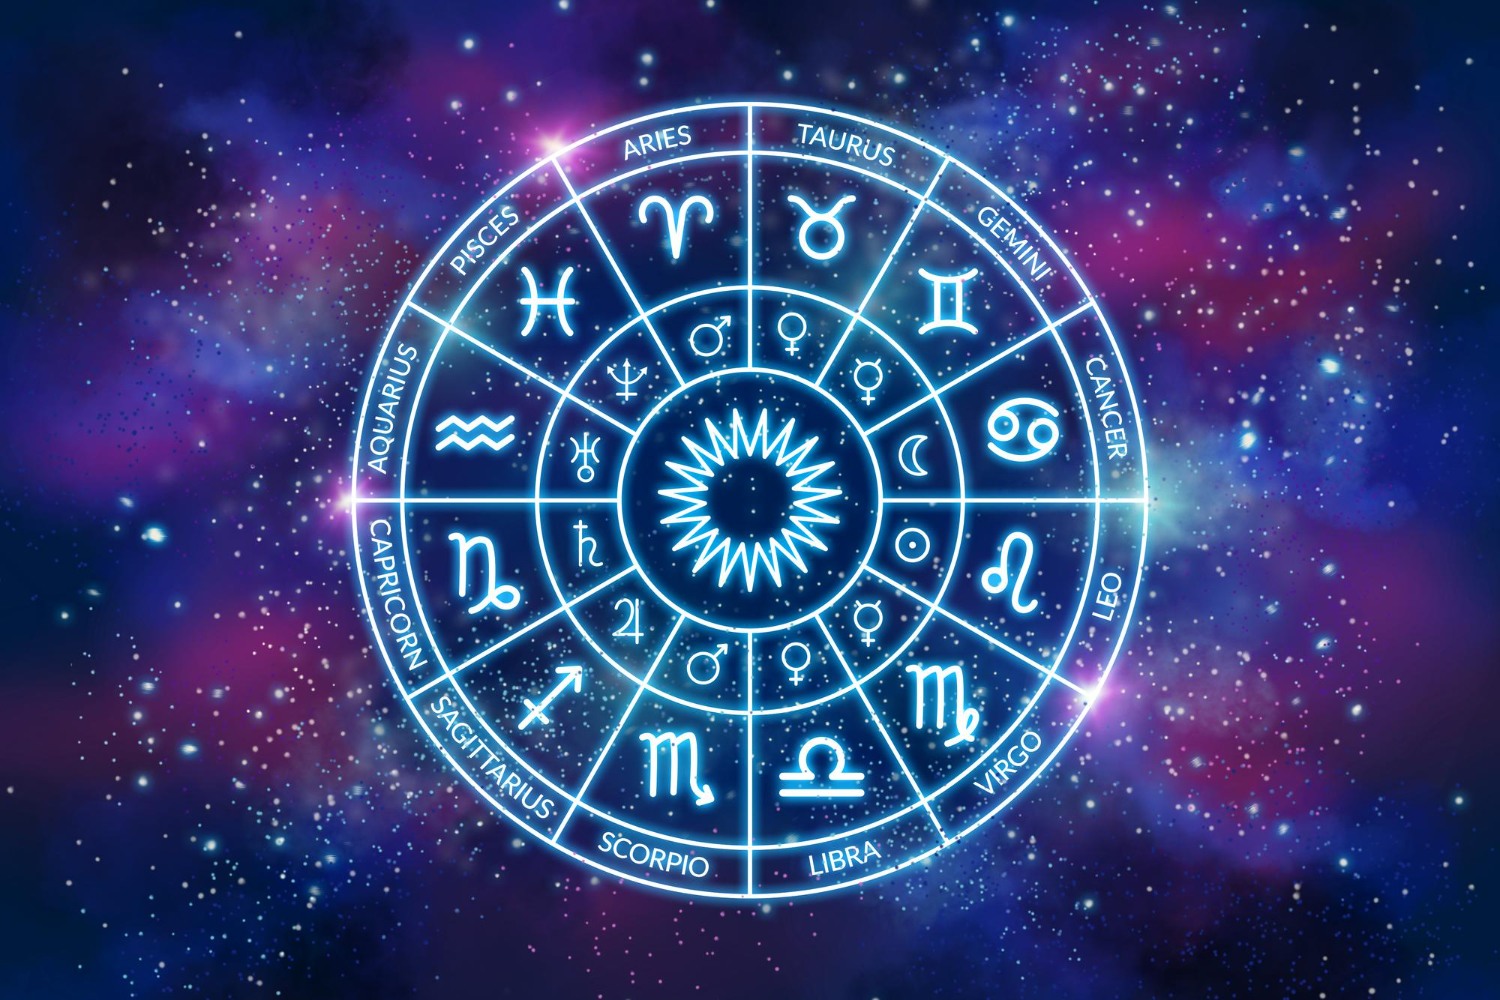 Astrology Zodiac Circle On The Background Of A Space The Science Of Stars And Planets Esoteric Knowledge Ruler Planets Twelve Signs Of The Zodiac 